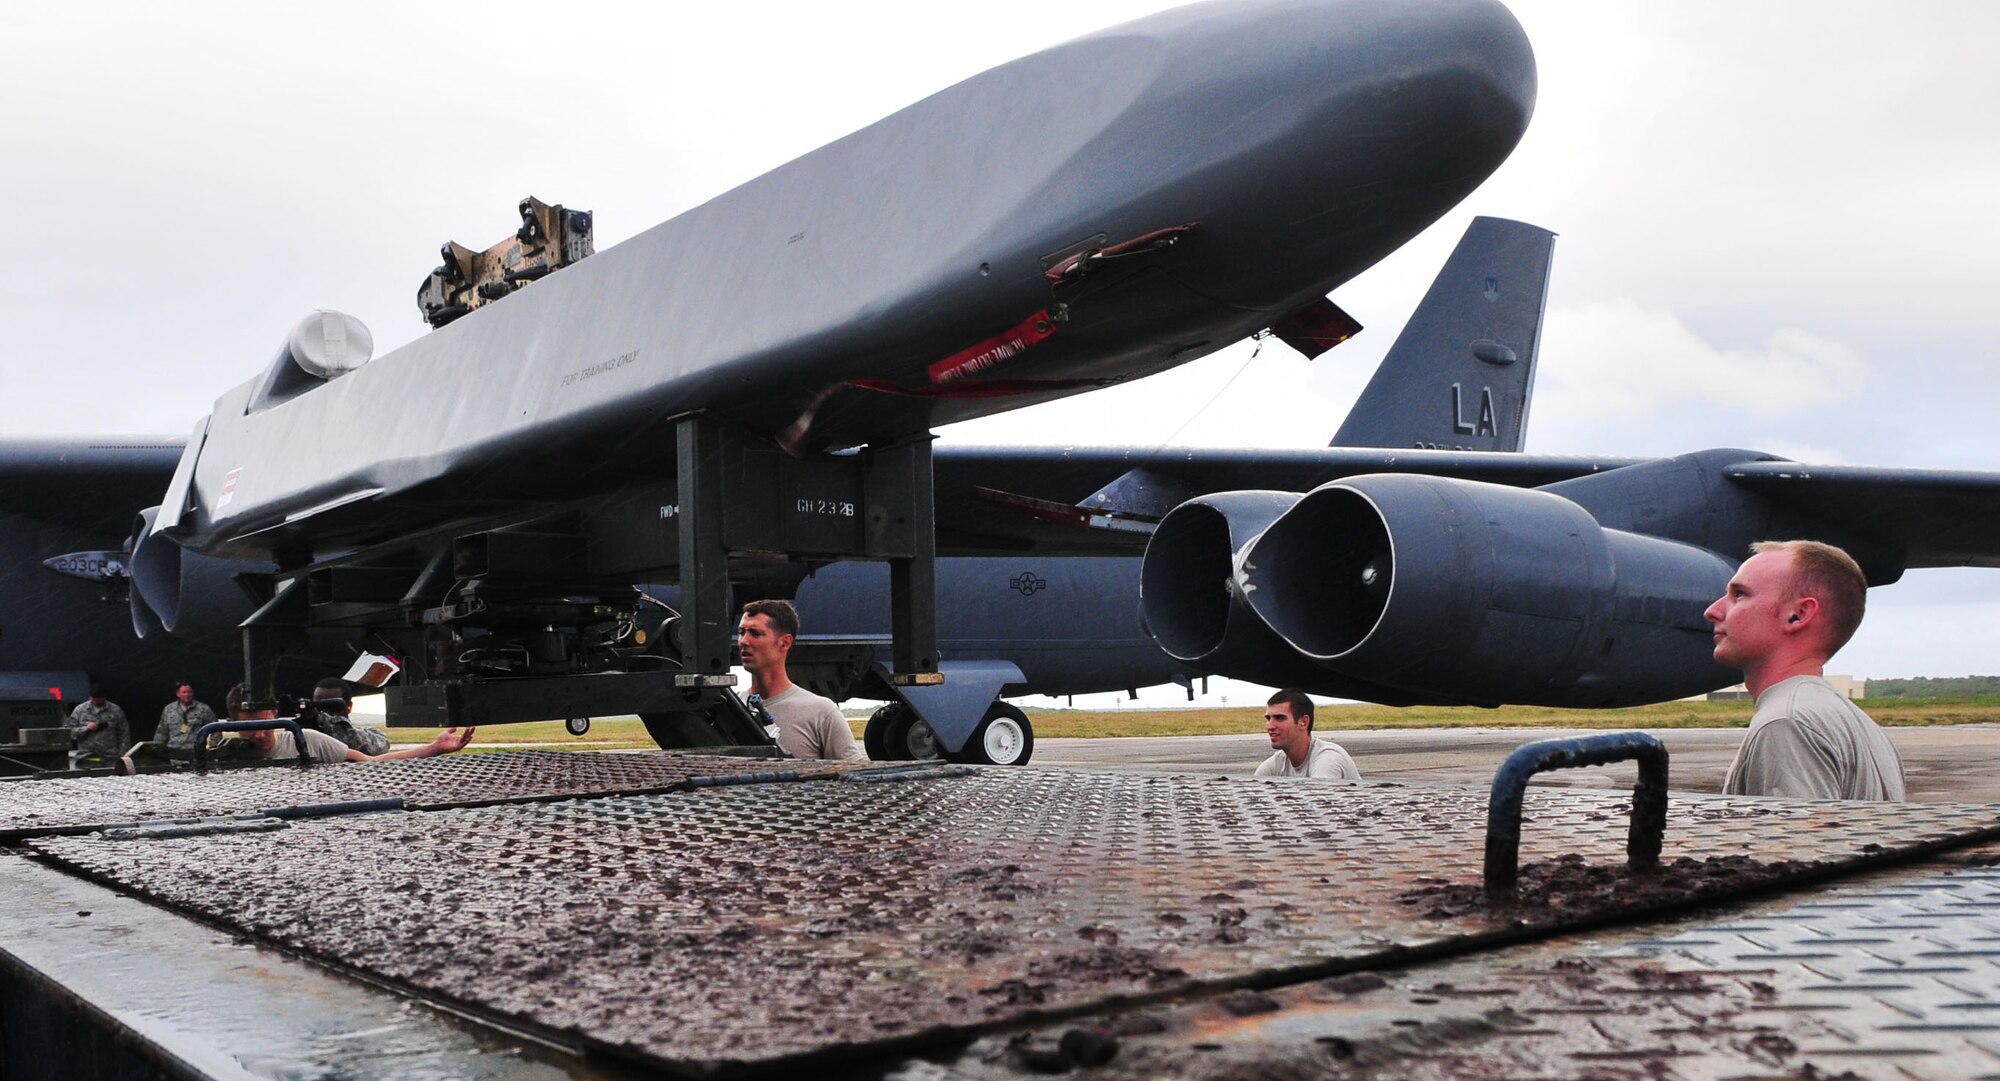 ANDERSEN AIR FORCE BASE, Guam - Airmen from the 36th Expeditionary Aircraft Maintenance Squadron load a conventional air launch cruise missile onto a B-52 during a recent operational readiness exercise here.  The Airmen are deployed to the 36th Wing from the 2nd Aircraft Maintenance Squadron, Barksdale AFB, La., as part of U.S. Pacific Command's continuous bomber presence. The mission of the 36th Wing is to employ, deploy, integrate and enable air and space forces from the most forward U.S. sovereign Air Force base in the Pacific.  (U.S. Air Force photo by Airman 1st Class Julian North)